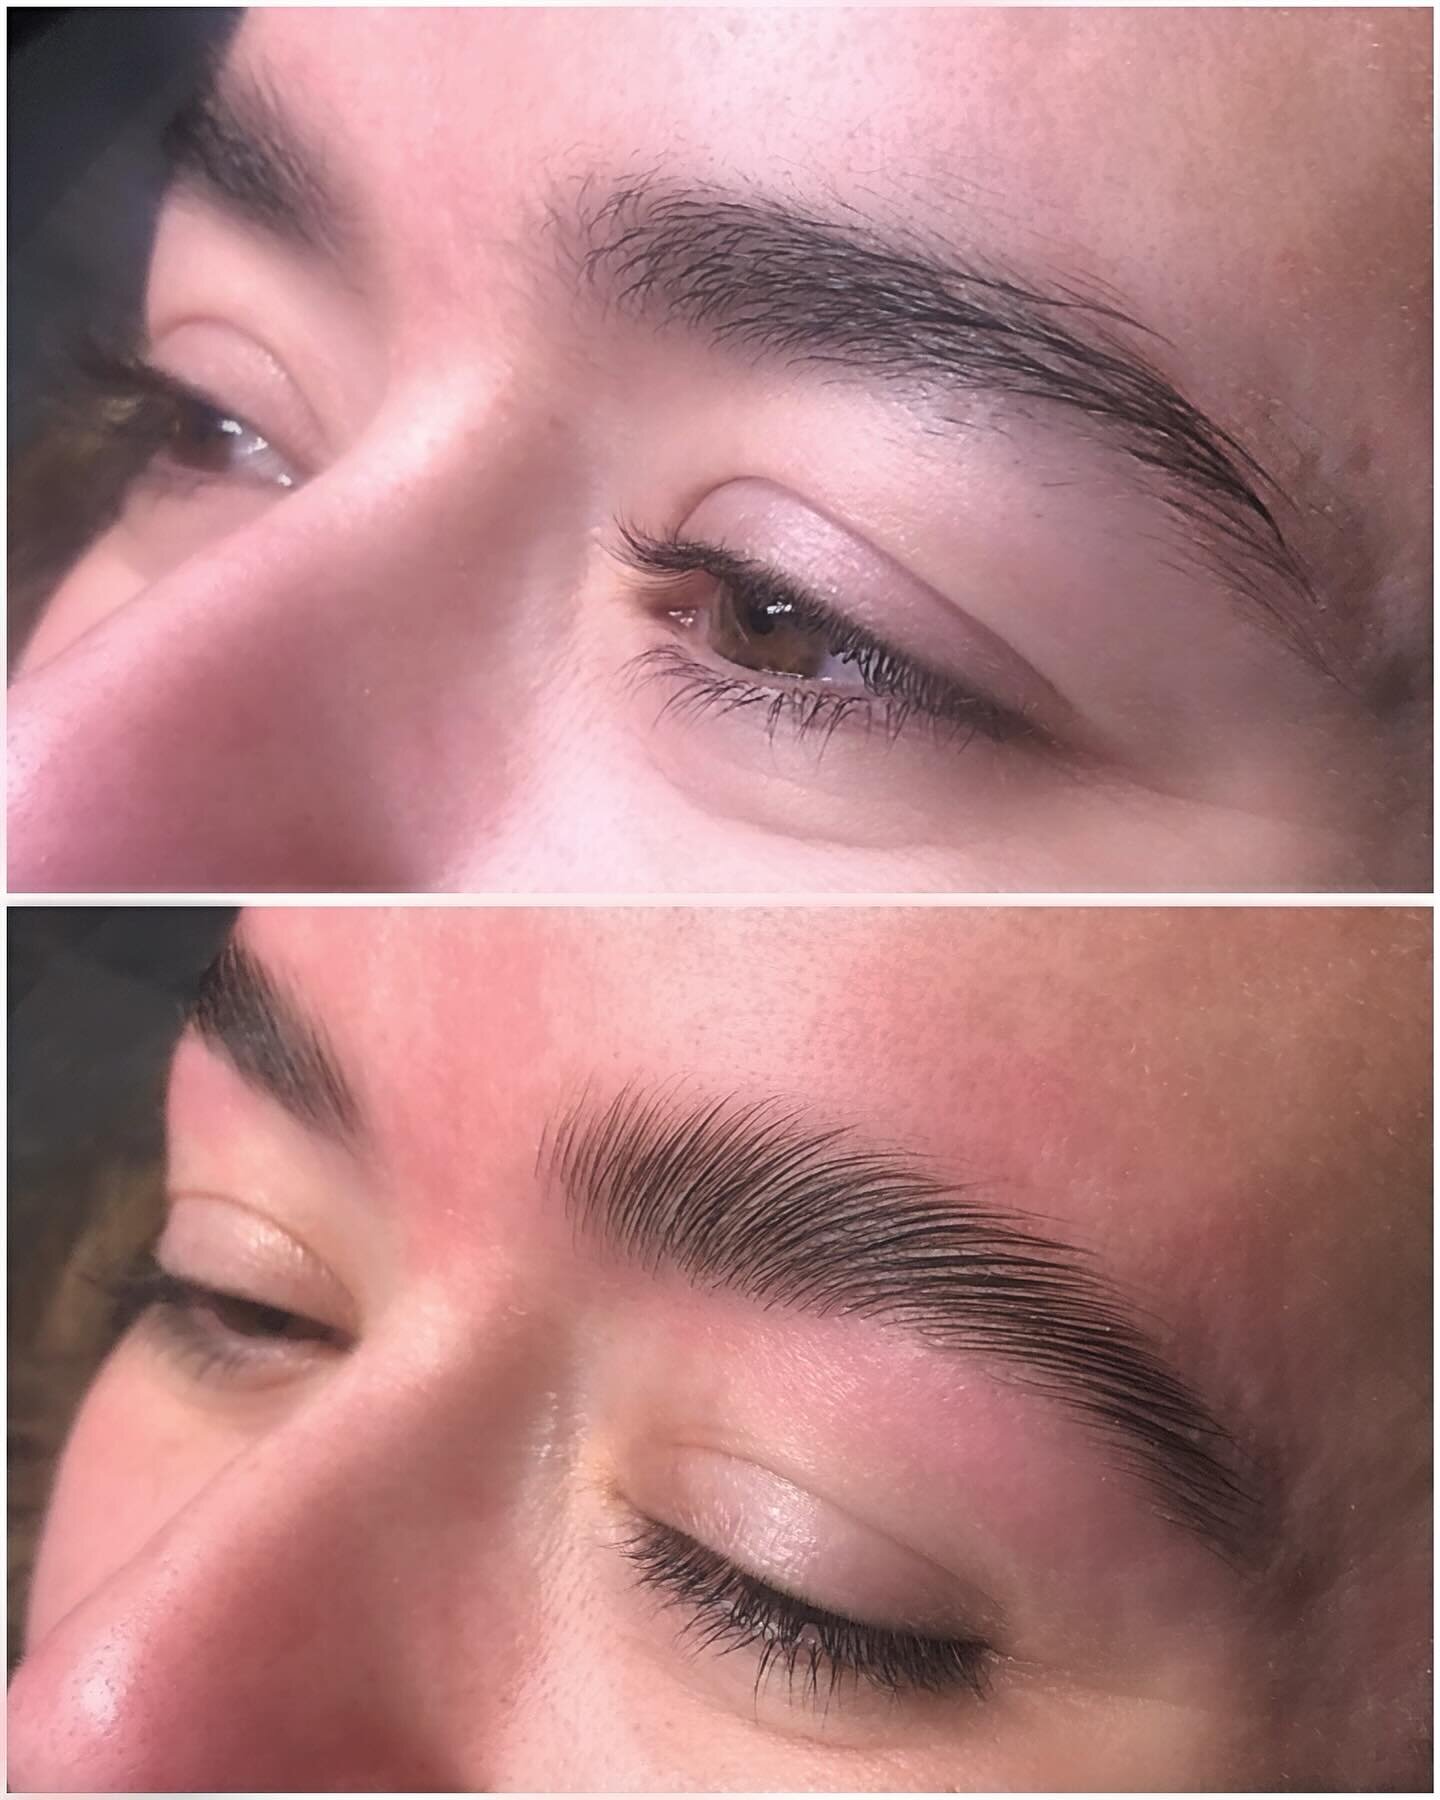 𝑺𝒘𝒊𝒑𝒆 👉🏽 for brow &amp; lash magic by our @eastcoastglo_alli

📸 1: Brow Lamination + Wax
📸 2. Lash Extensions
📸 3. Brow Lamination
📸 4. Upper + Lower Lash Tint
📸 5. Brow Lamination

⚡️Booking link in bio

#eastcoastglo #eyelashextensions 